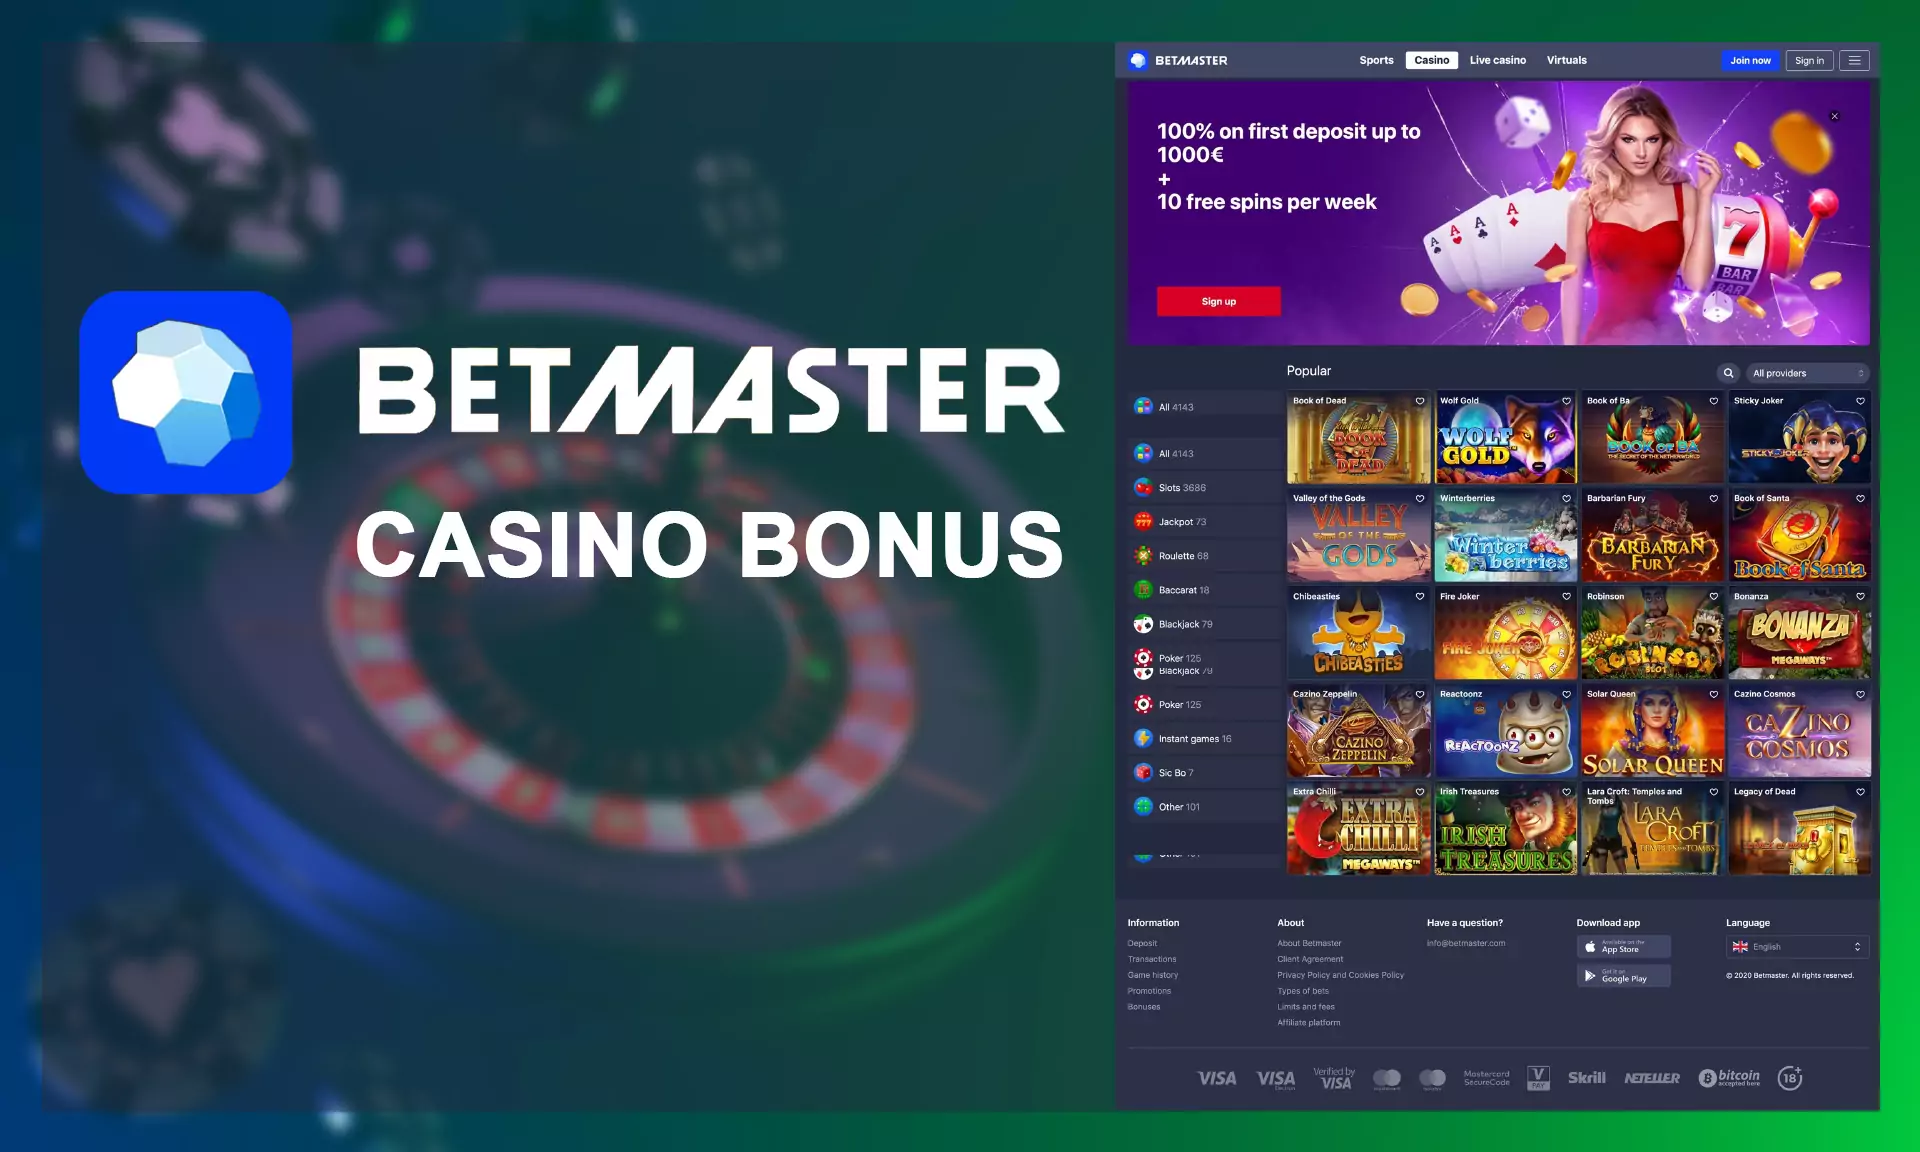 Indian users can get special casino bonuses on Betmaster.